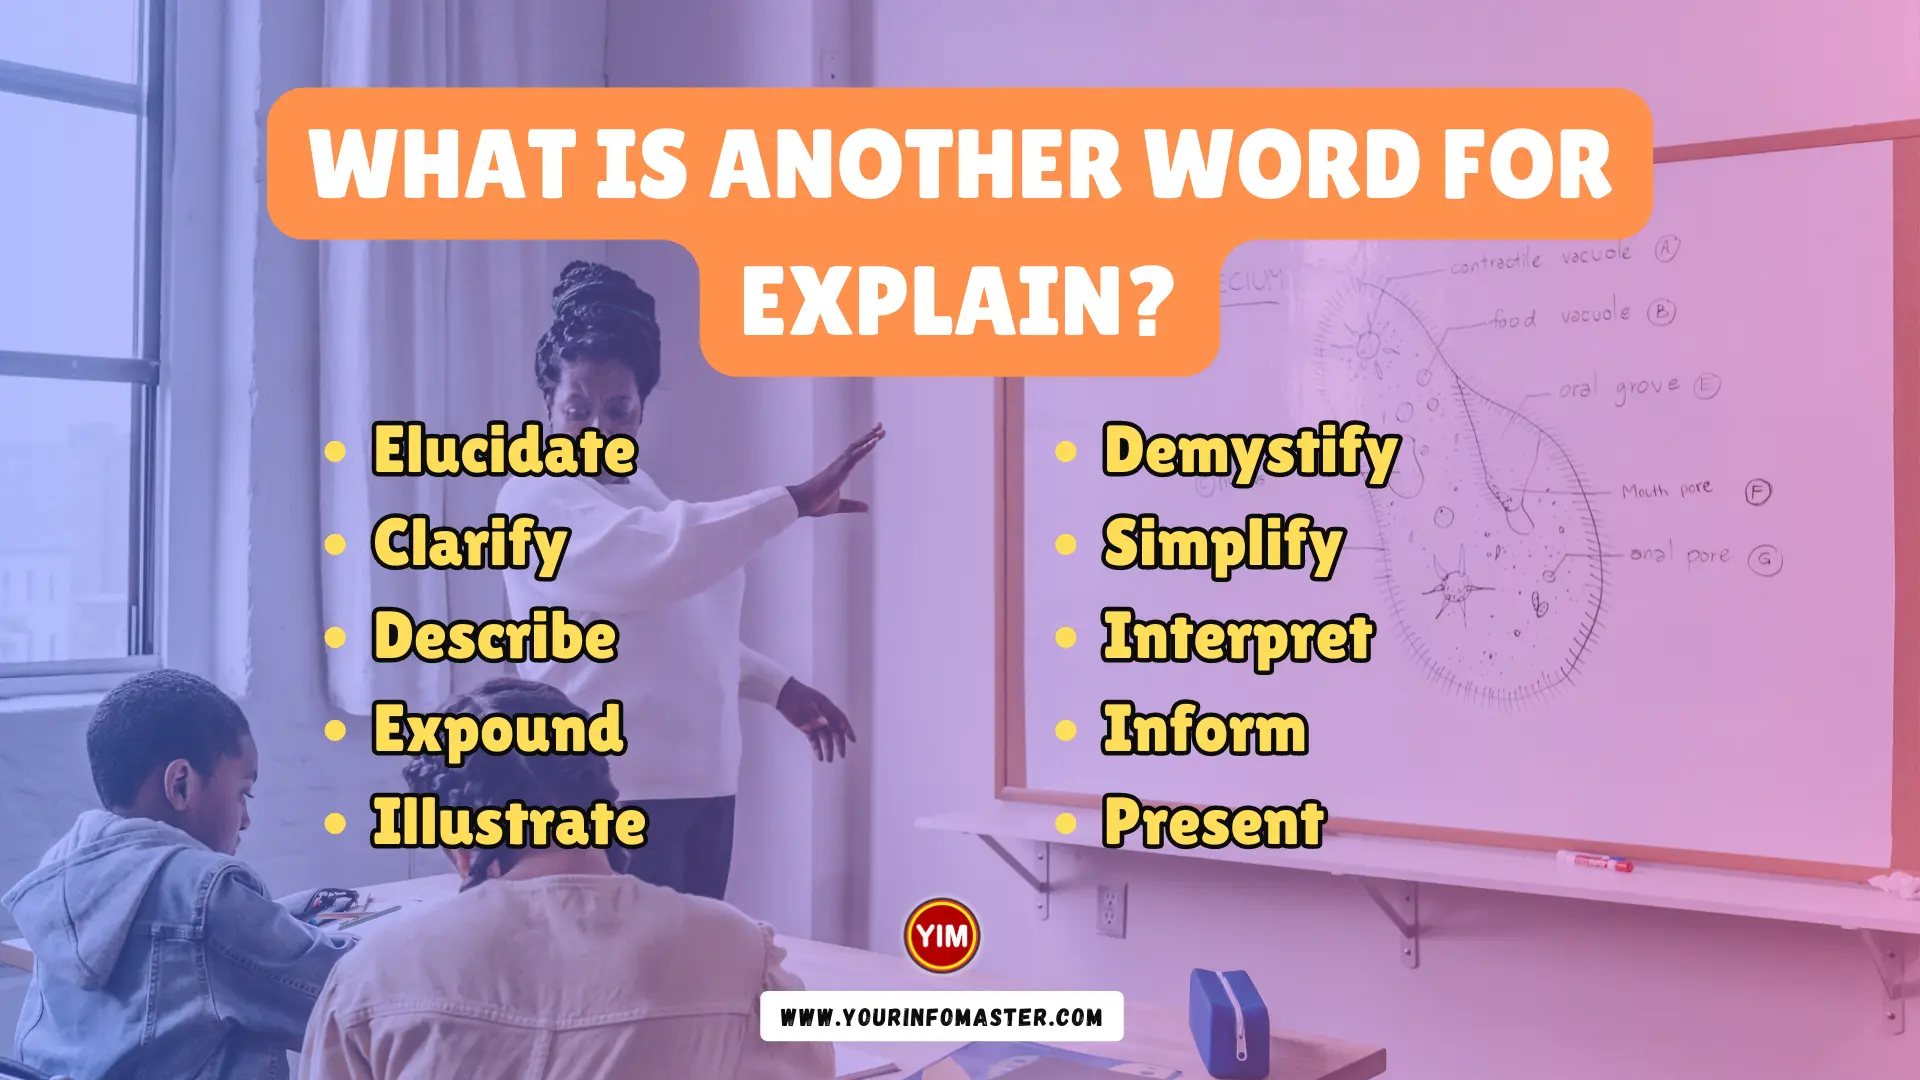 What is another word for Explain